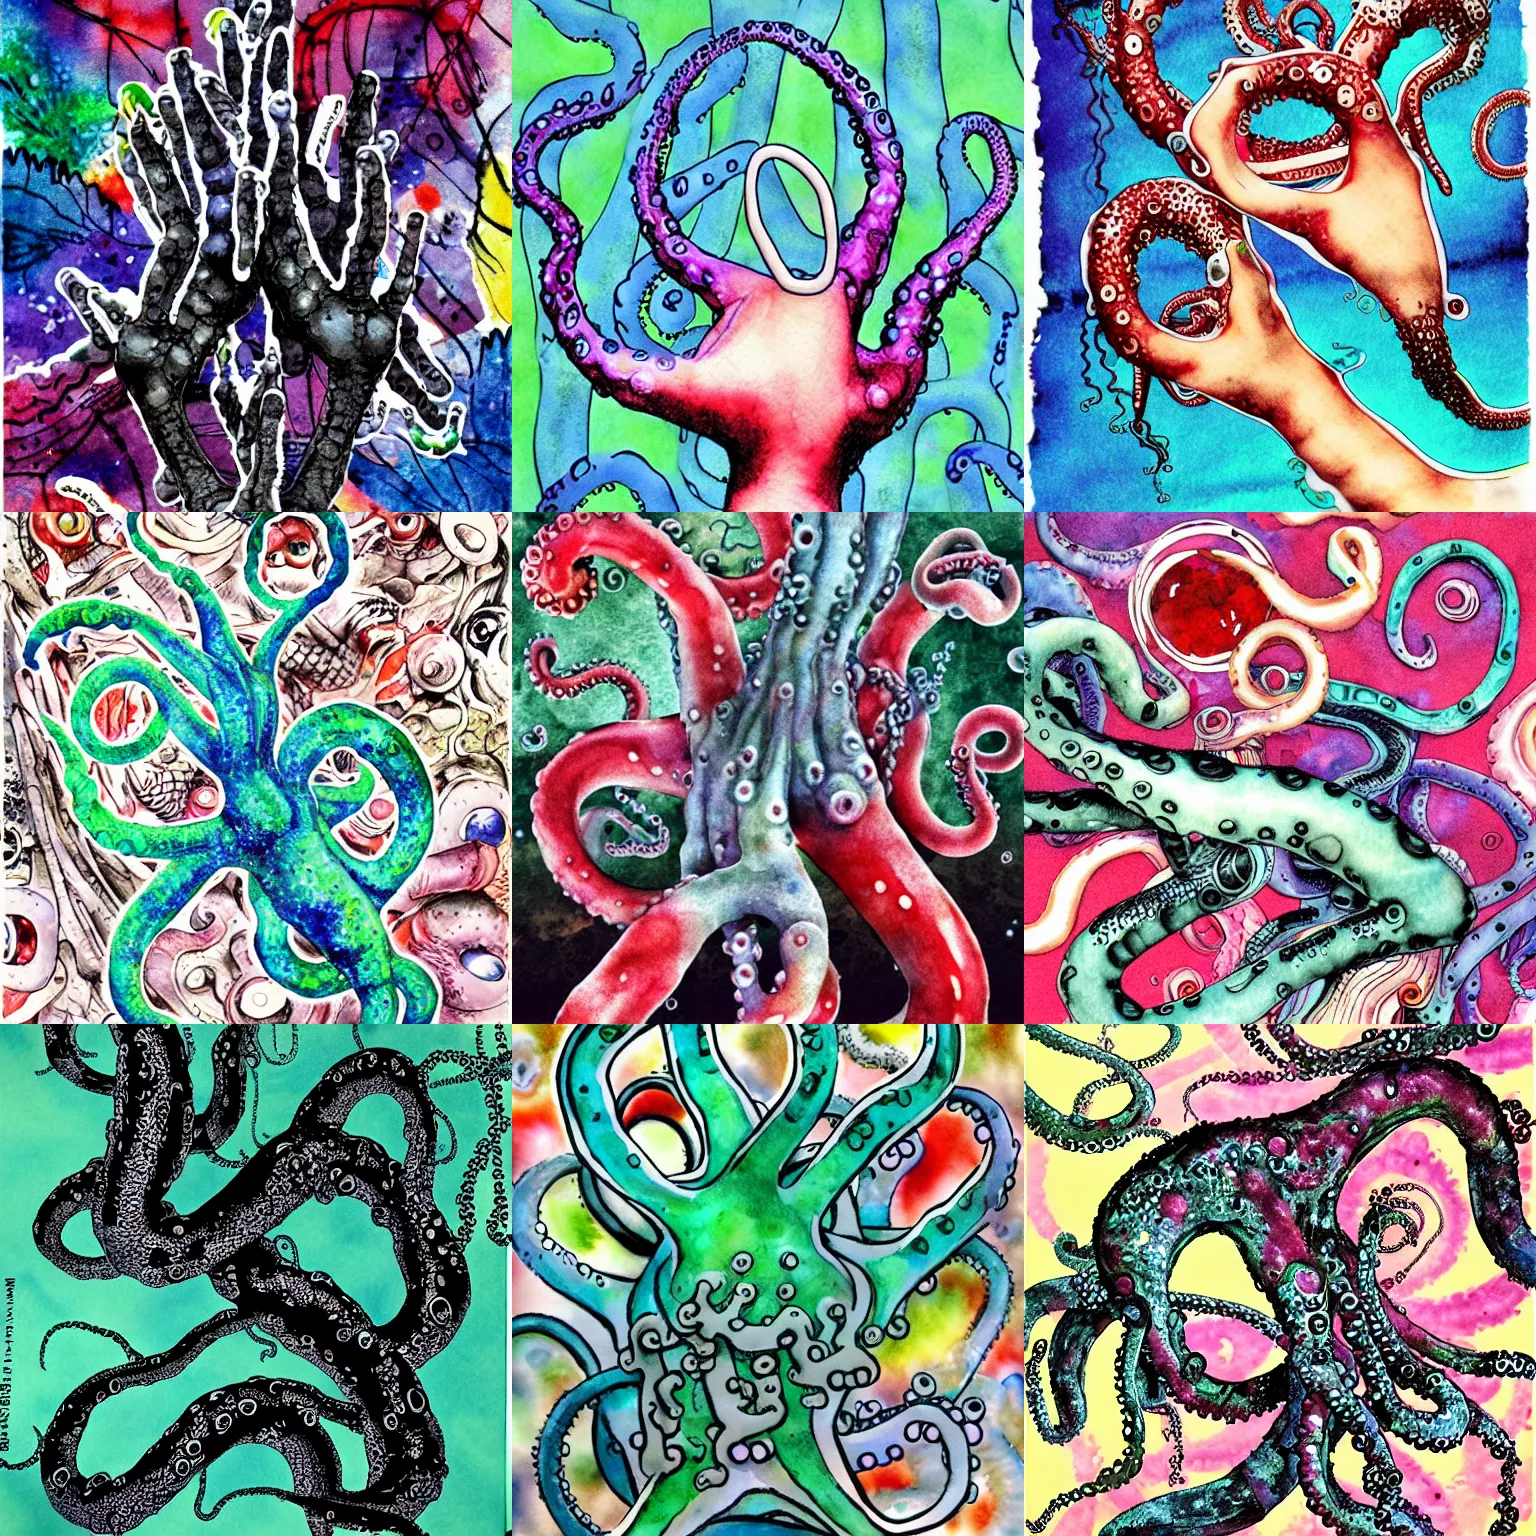 Prompt: hands with tentacle fingers artwork by yoshitaka amano, watercolors background, collage